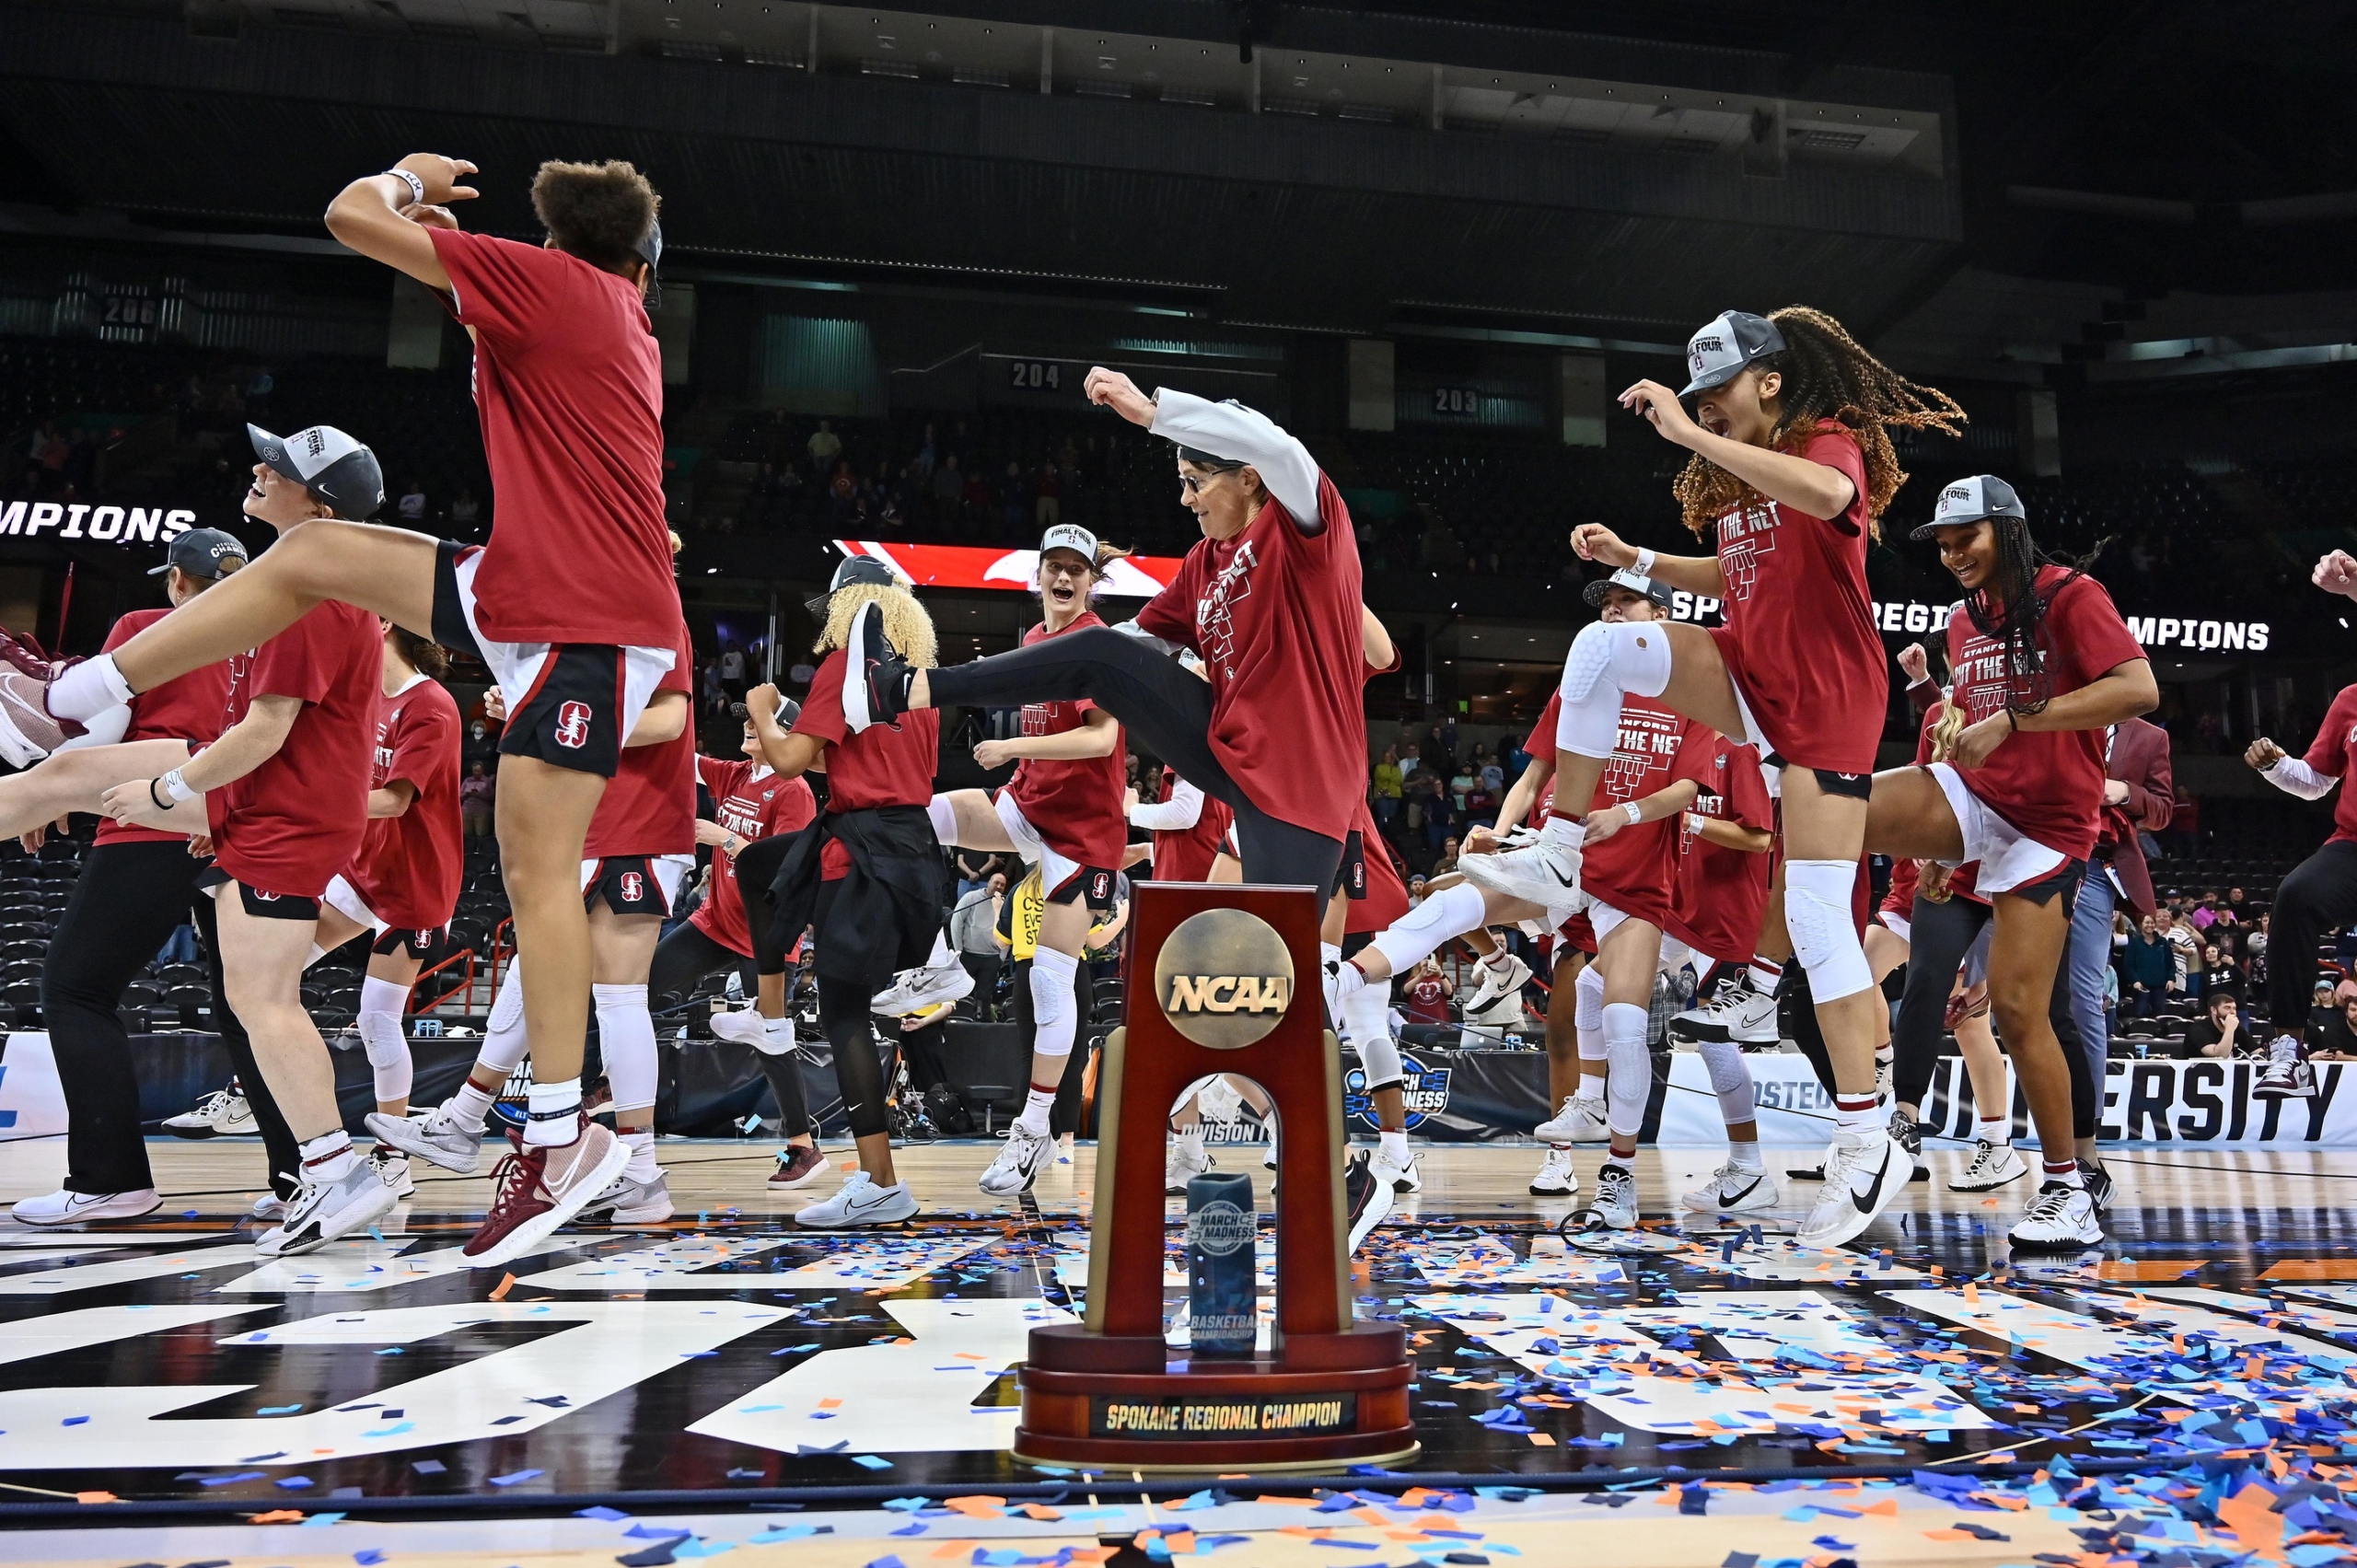 Mar 27, 2022; Spokane, WA, USA; Stanford Cardinal players and coaches dance in celebration after the game against the Texas Longhorns in the Spokane regional finals. Credit: James Snook-USA TODAY Sports